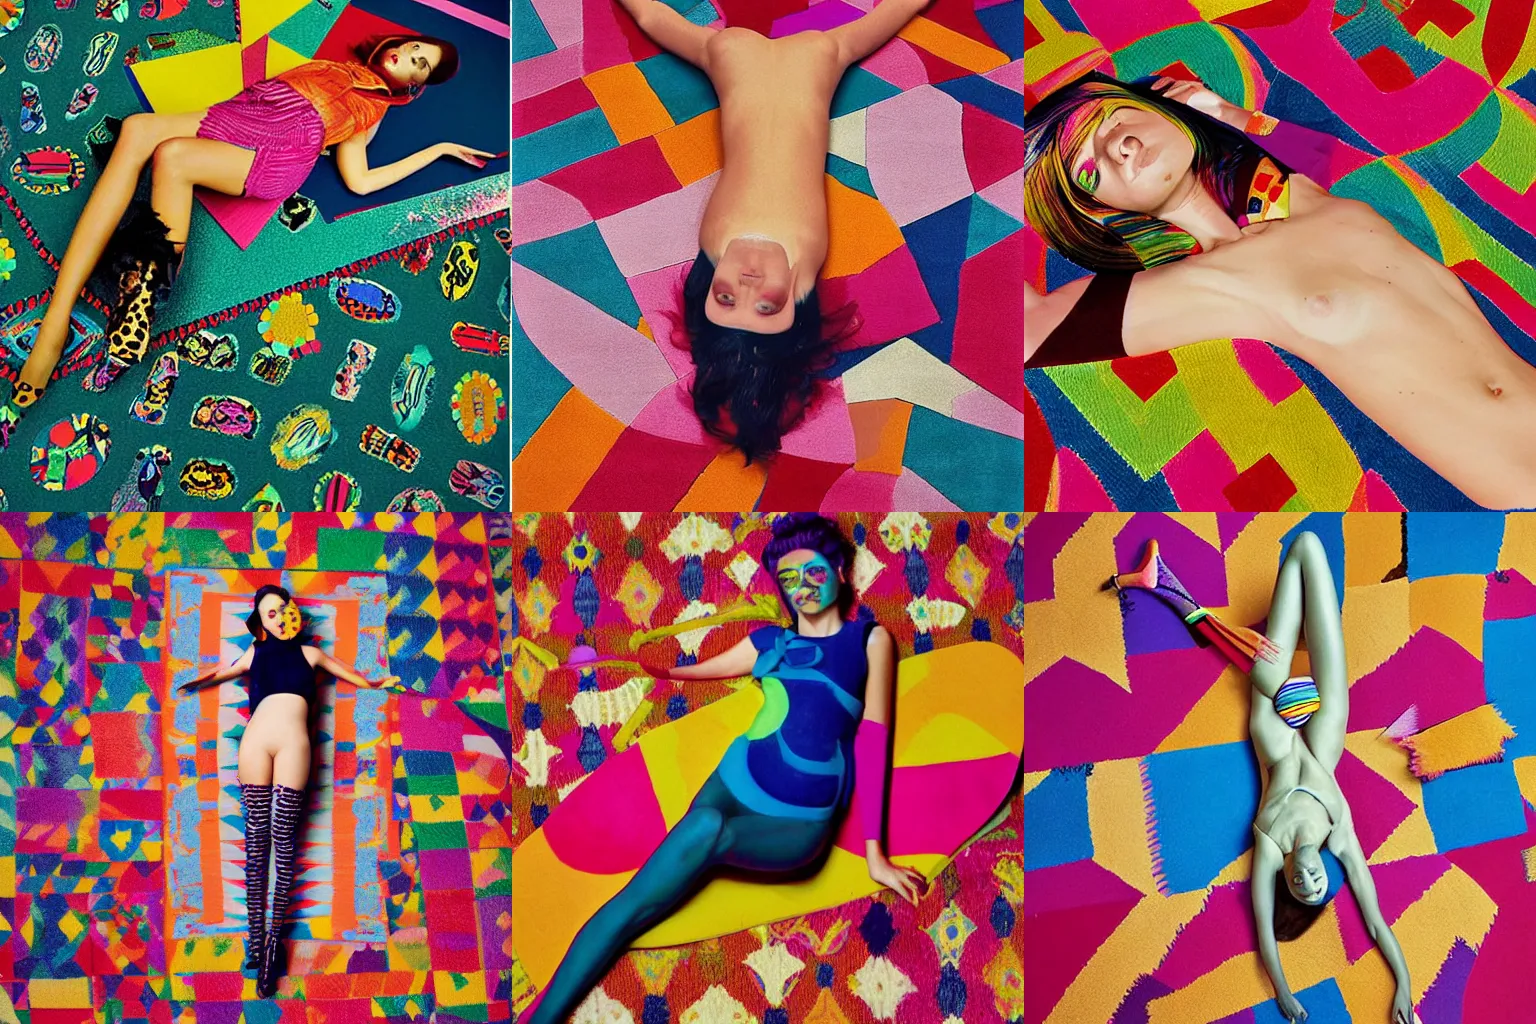 Prompt: a beautiful fashion model laying on a colorful rug, wearing a lot of different colorful ties on her body. surreal photograph, toiletpaper magazine, 3 5 mm photograph, colourful, by pierpaolo ferrari, maurizio cattelan